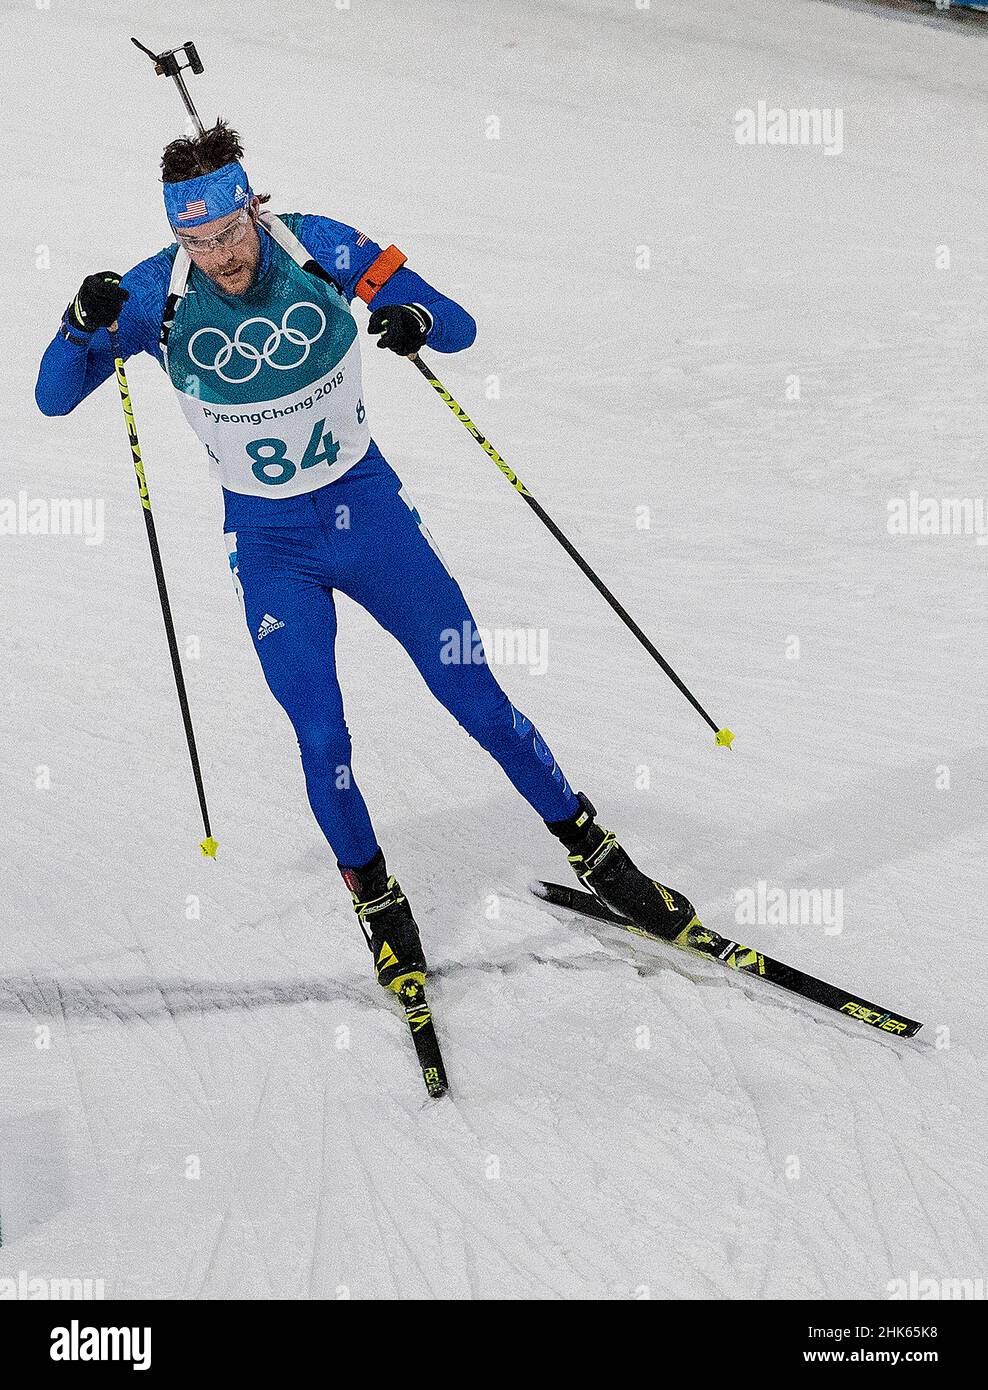 Leif Nordgren finished in 66th place in the Men's 20km Individual at Alpensia Biathlon Centre on Thursday, Feb. 15, 2018, at the Winter Olympics in Pyeongchang, South Korea. (Photo by Carlos Gonzalez/Minneapolis Star Tribune/TNS/Sipa USA) Stock Photo